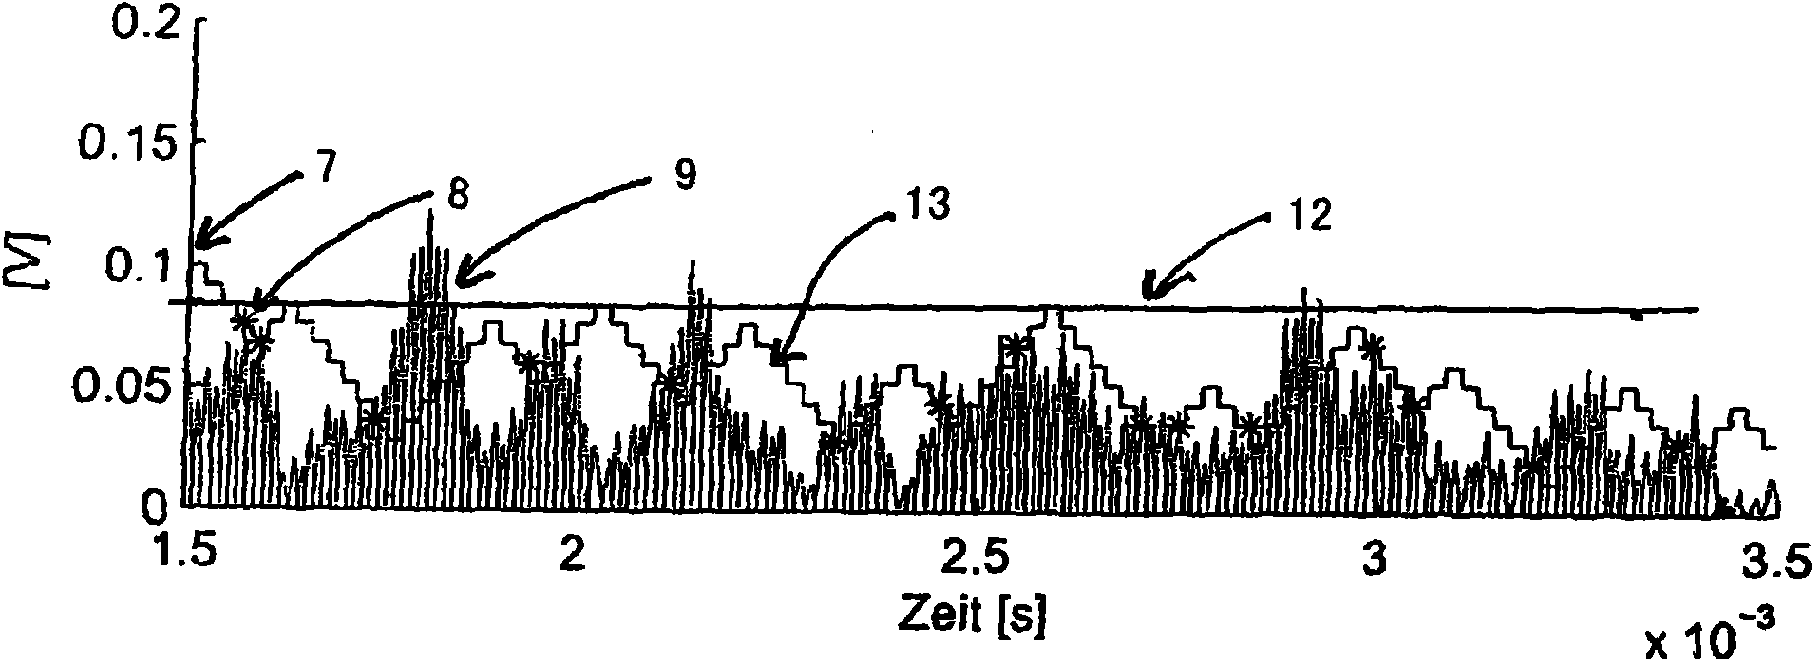 Method for dynamic calculation of noise levels